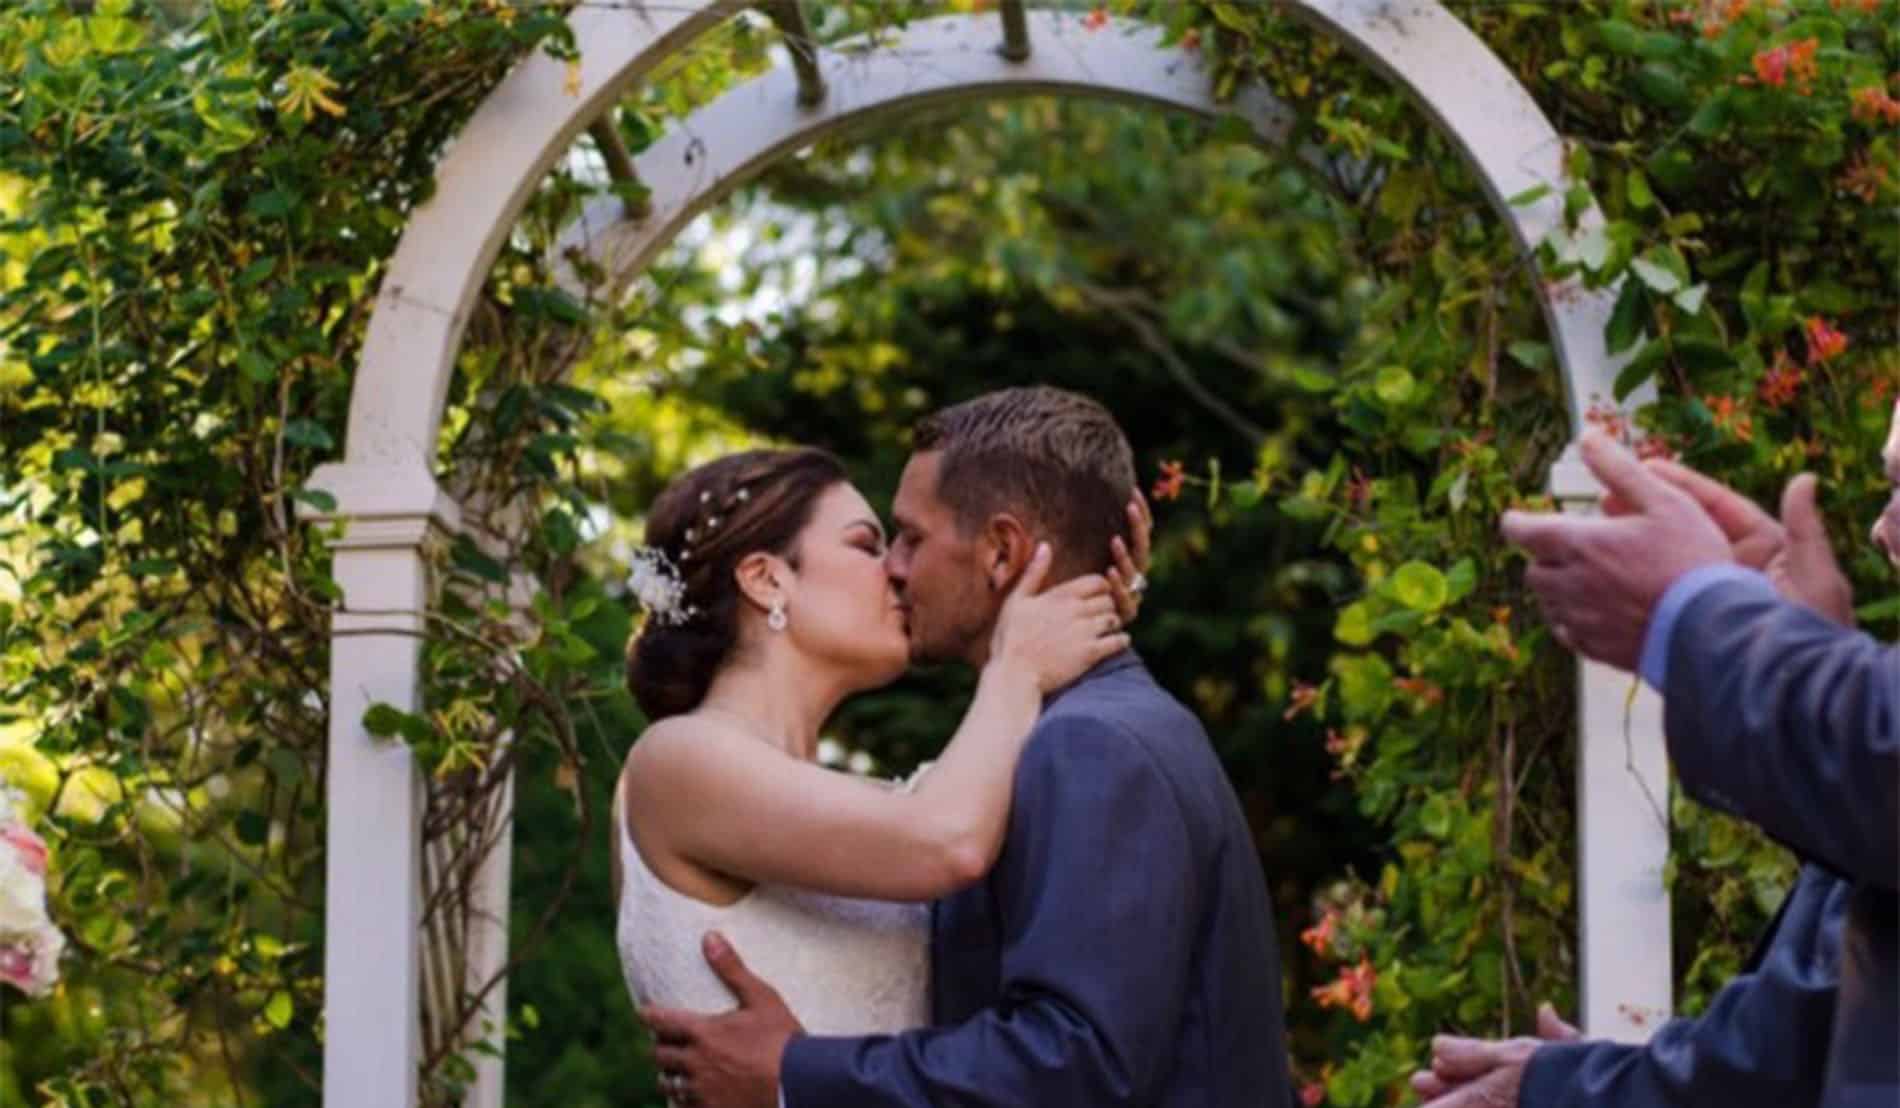 Bride and groom kissing under a white arched trellis with flowering vine